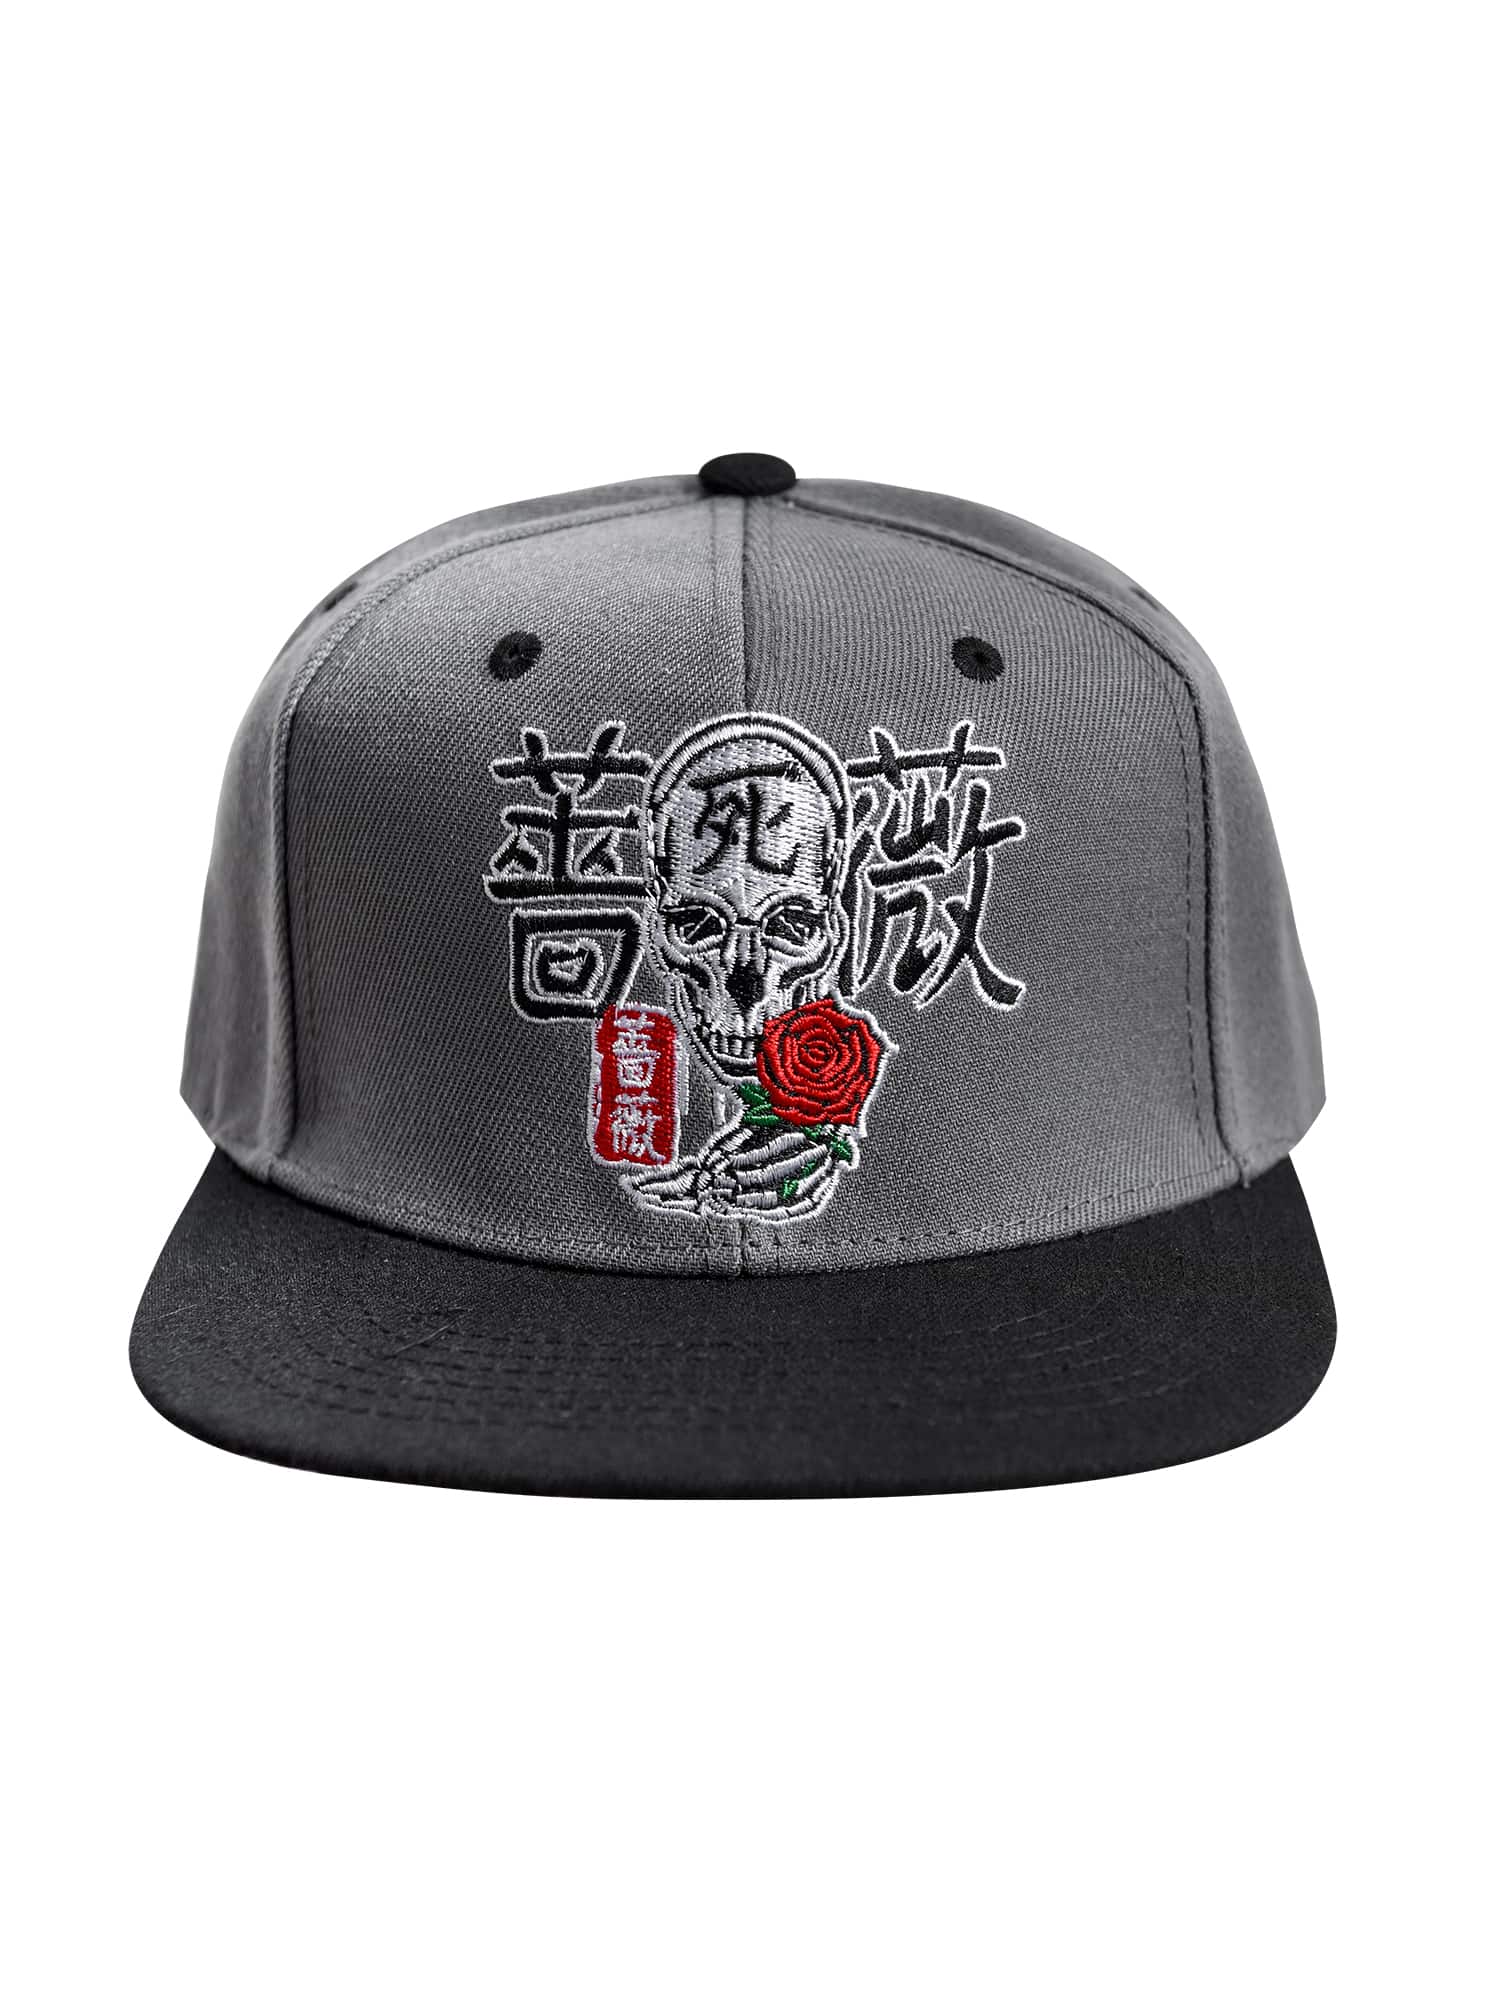 Front view of the Men’s Kanji Death Snapback by Ring of Fire Clothing in Black, Grey, White, and Red colors, showcasing the unique design of Japanese characters surrounding a skull with a rose.